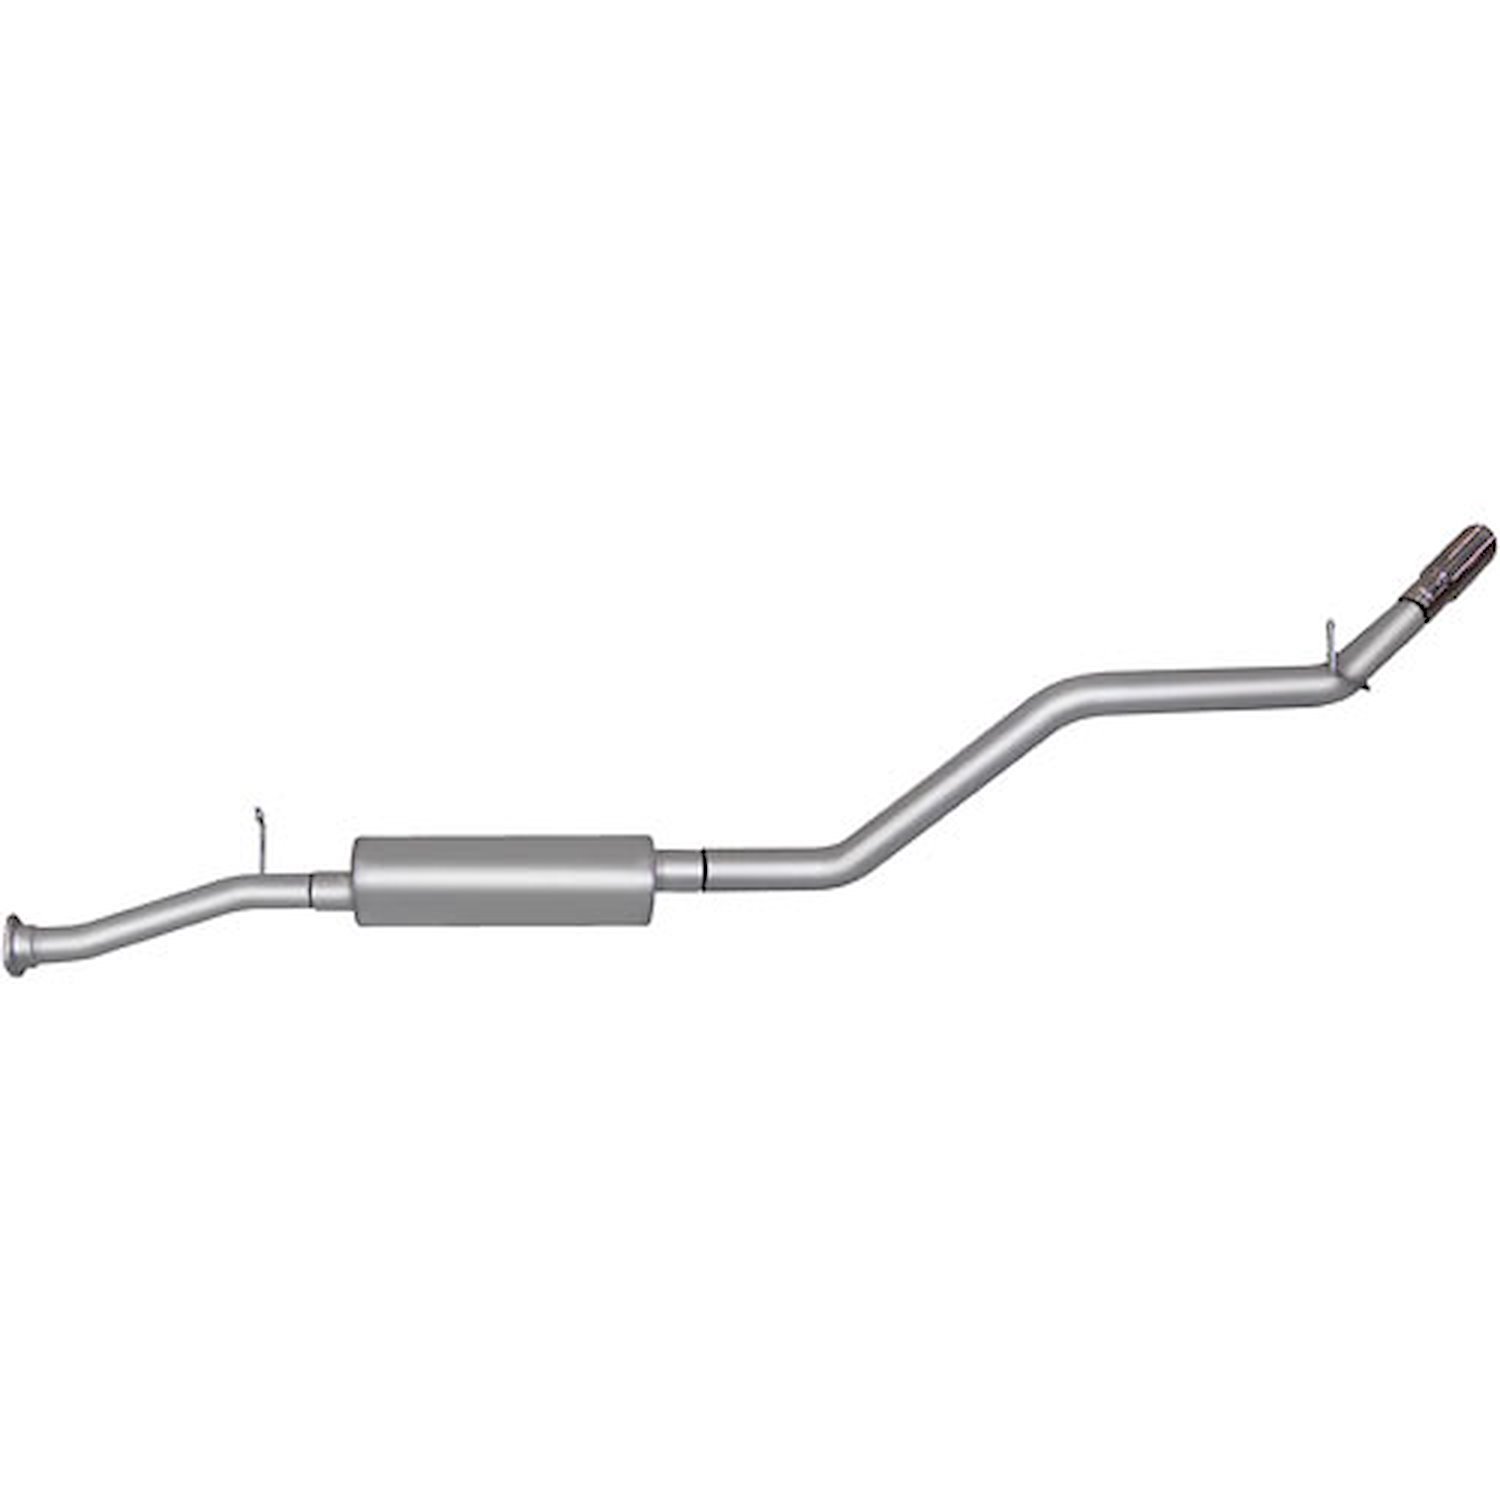 Swept-Side Cat-Back Exhaust 2001-03 Chevy S10/GMC Sonoma 4.3L